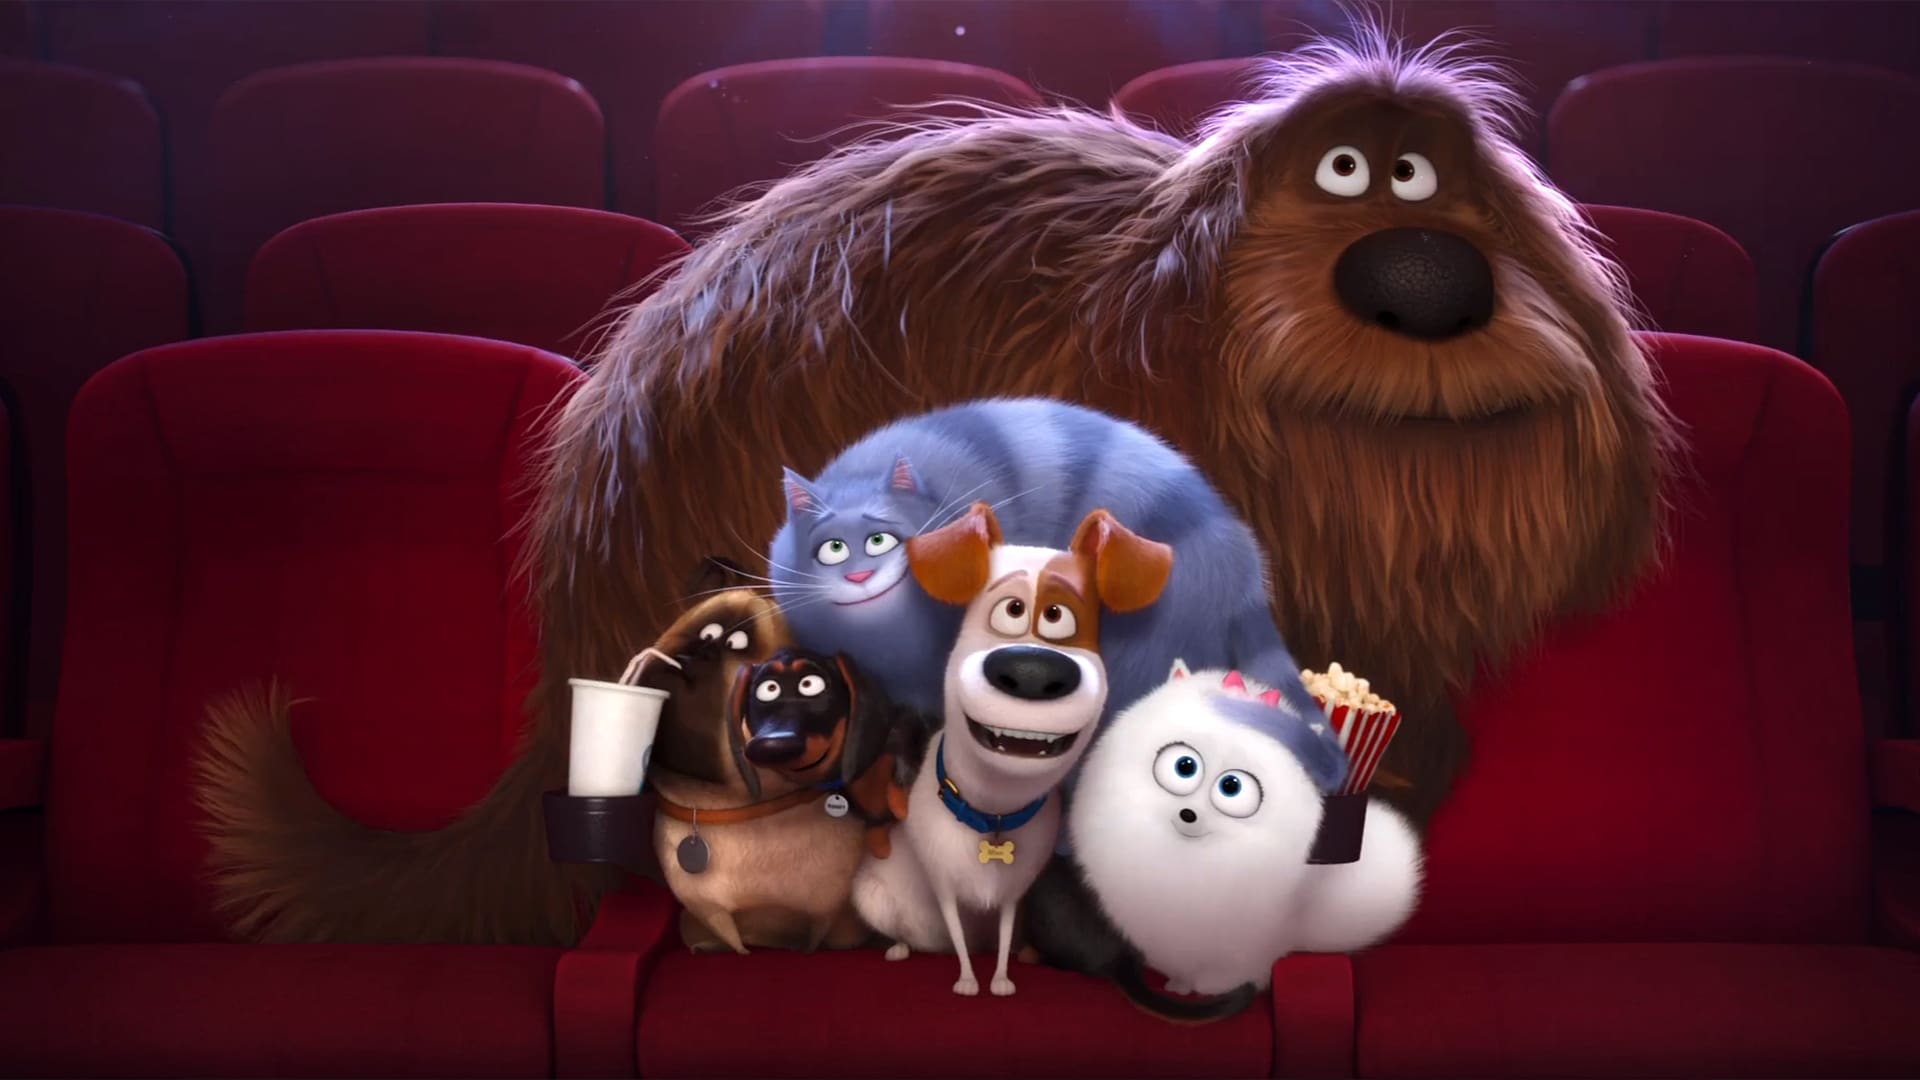 How To Watch The Secret Life Of Pets